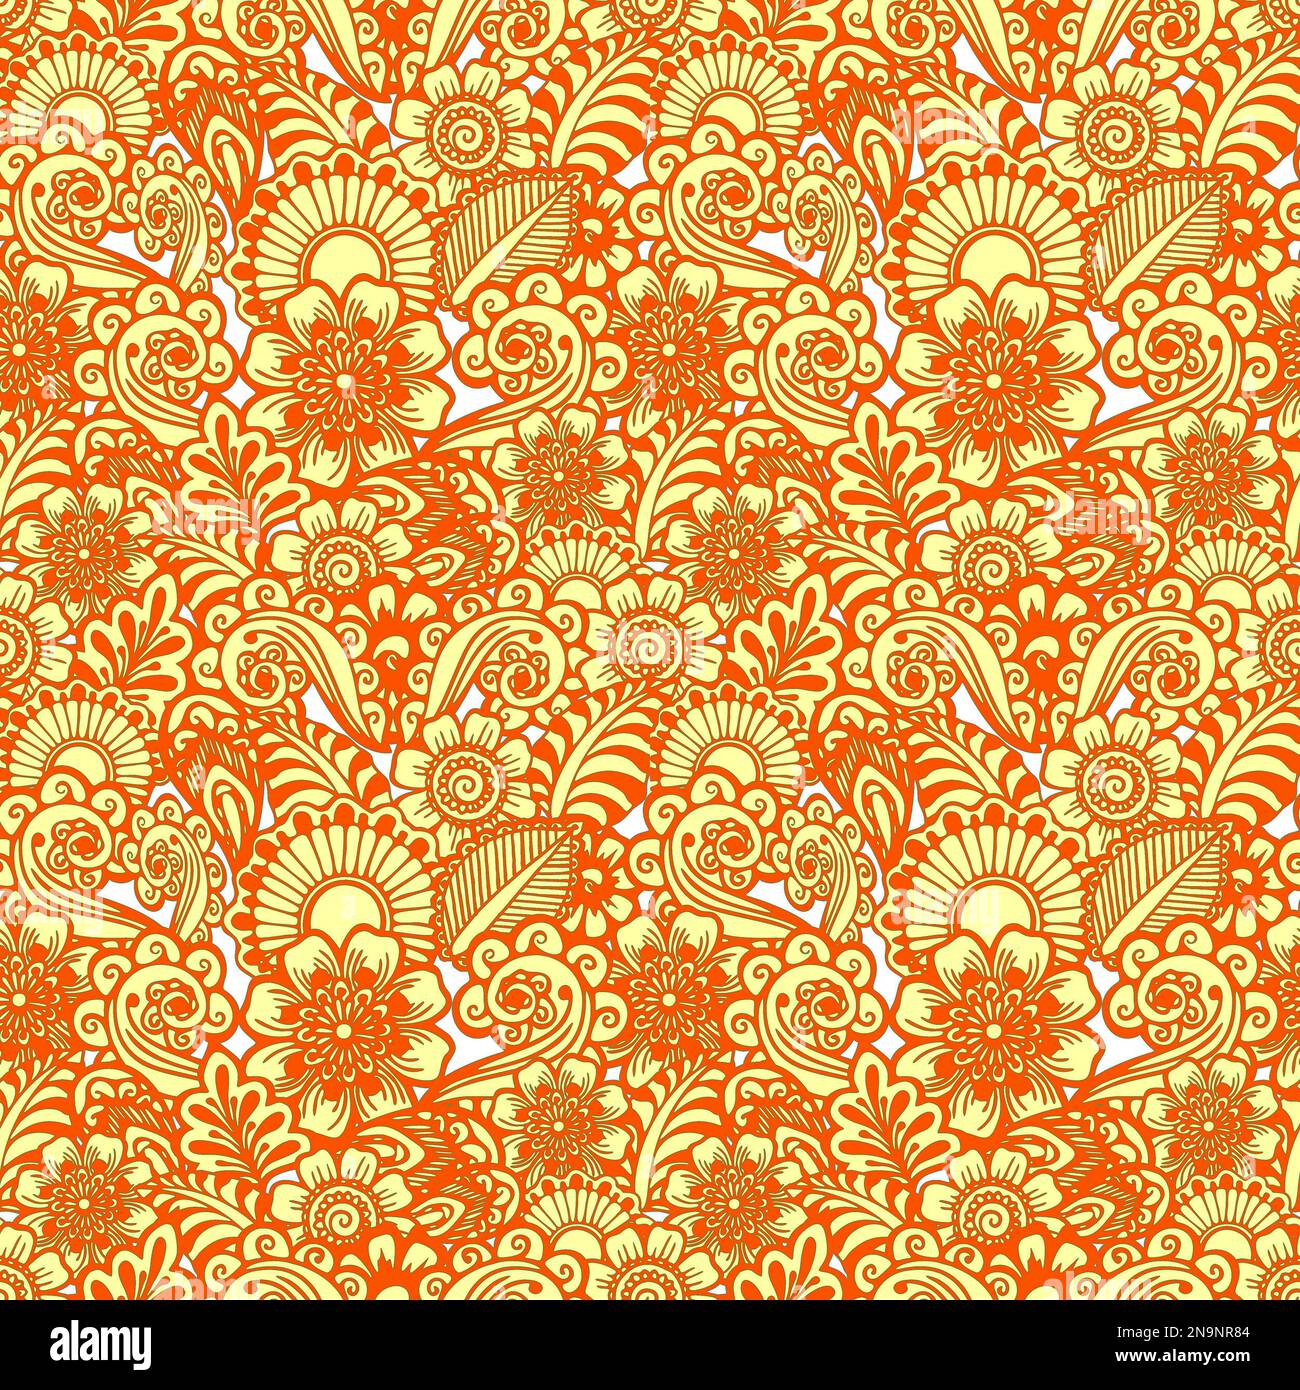 seamless floral pattern of stylized yellow elements with ginger outline, texture, design Stock Photo